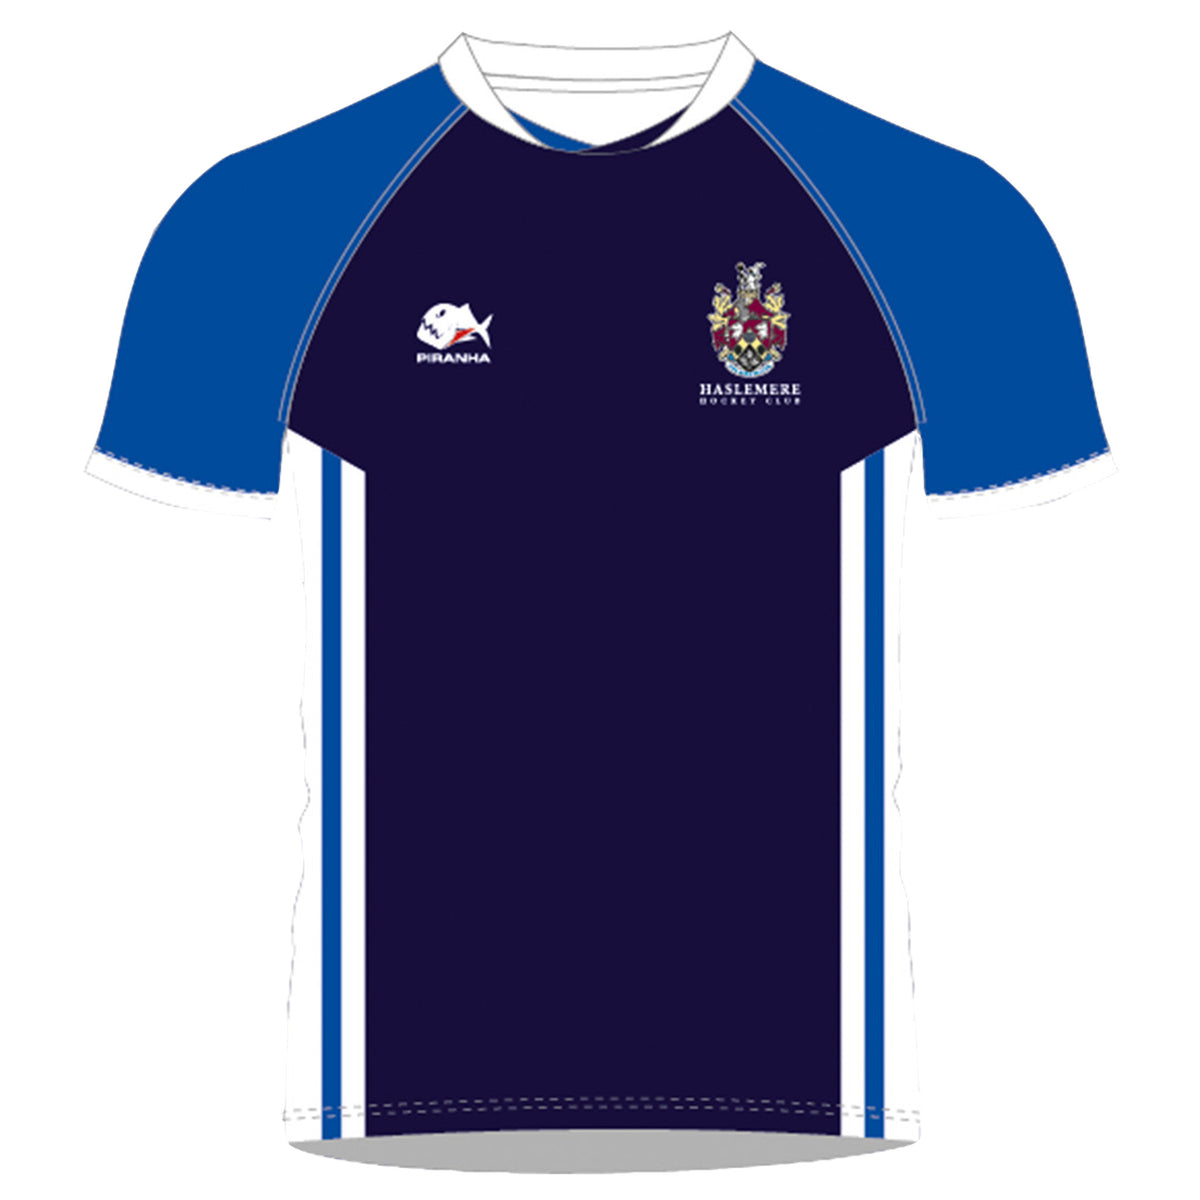 Haslemere HC Junior Home Playing Shirt